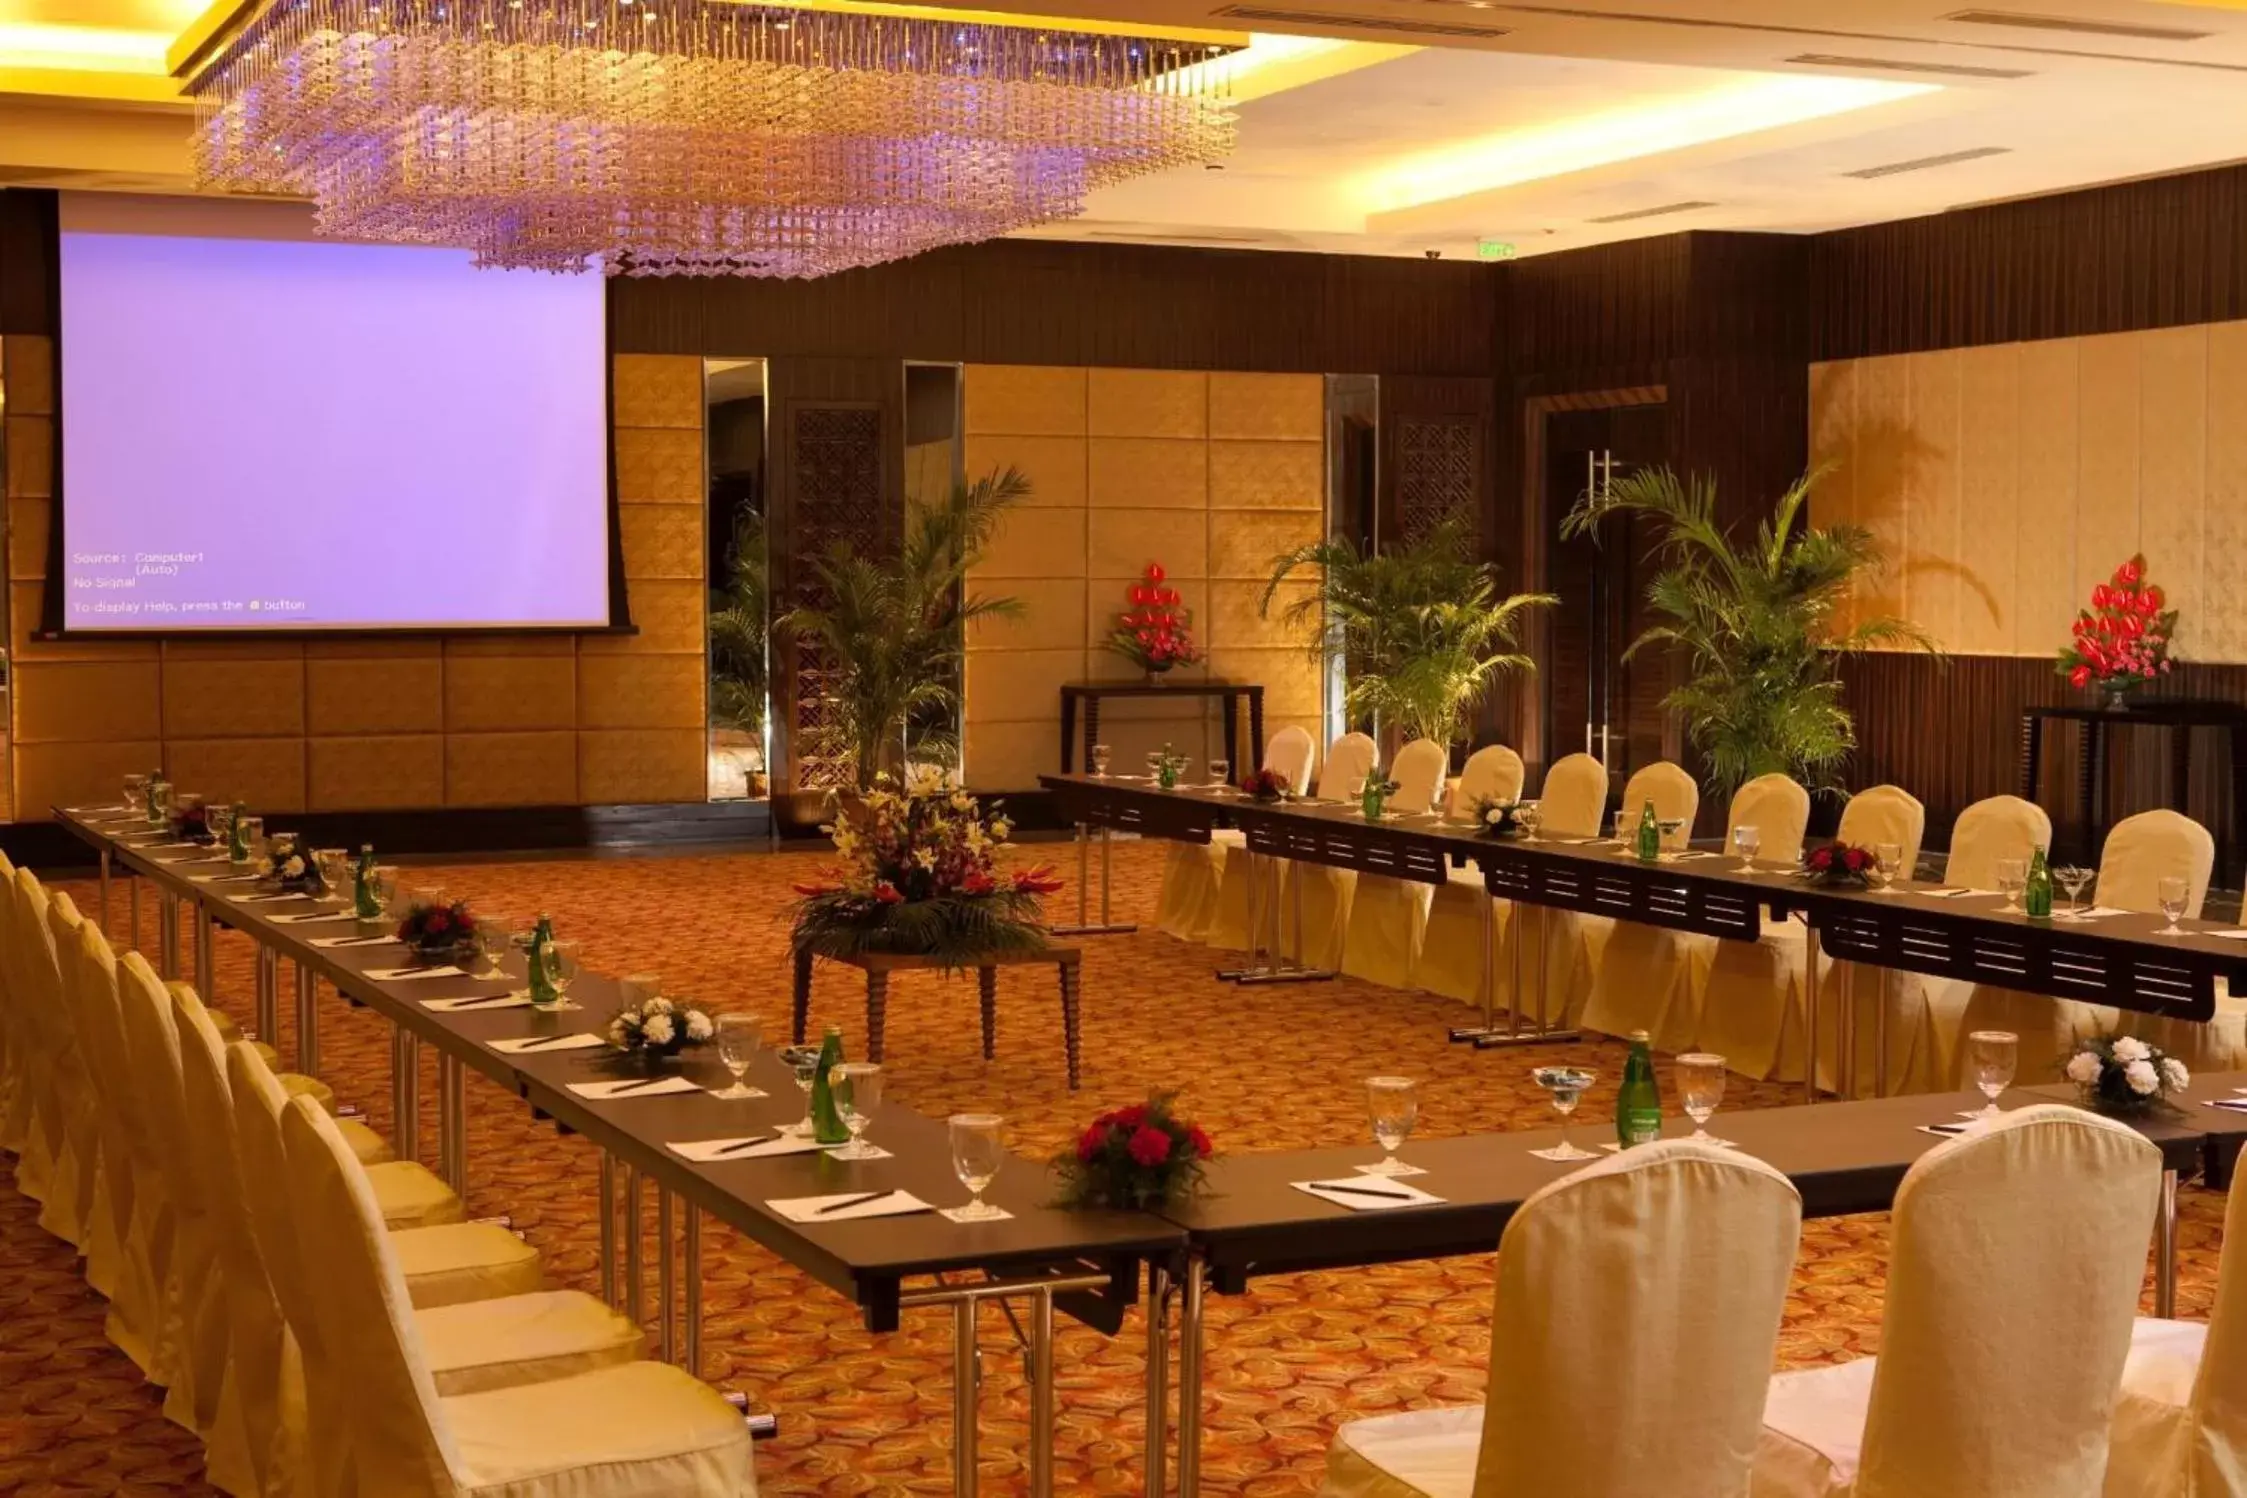 Meeting/conference room, Banquet Facilities in Radisson Blu Hotel, Indore